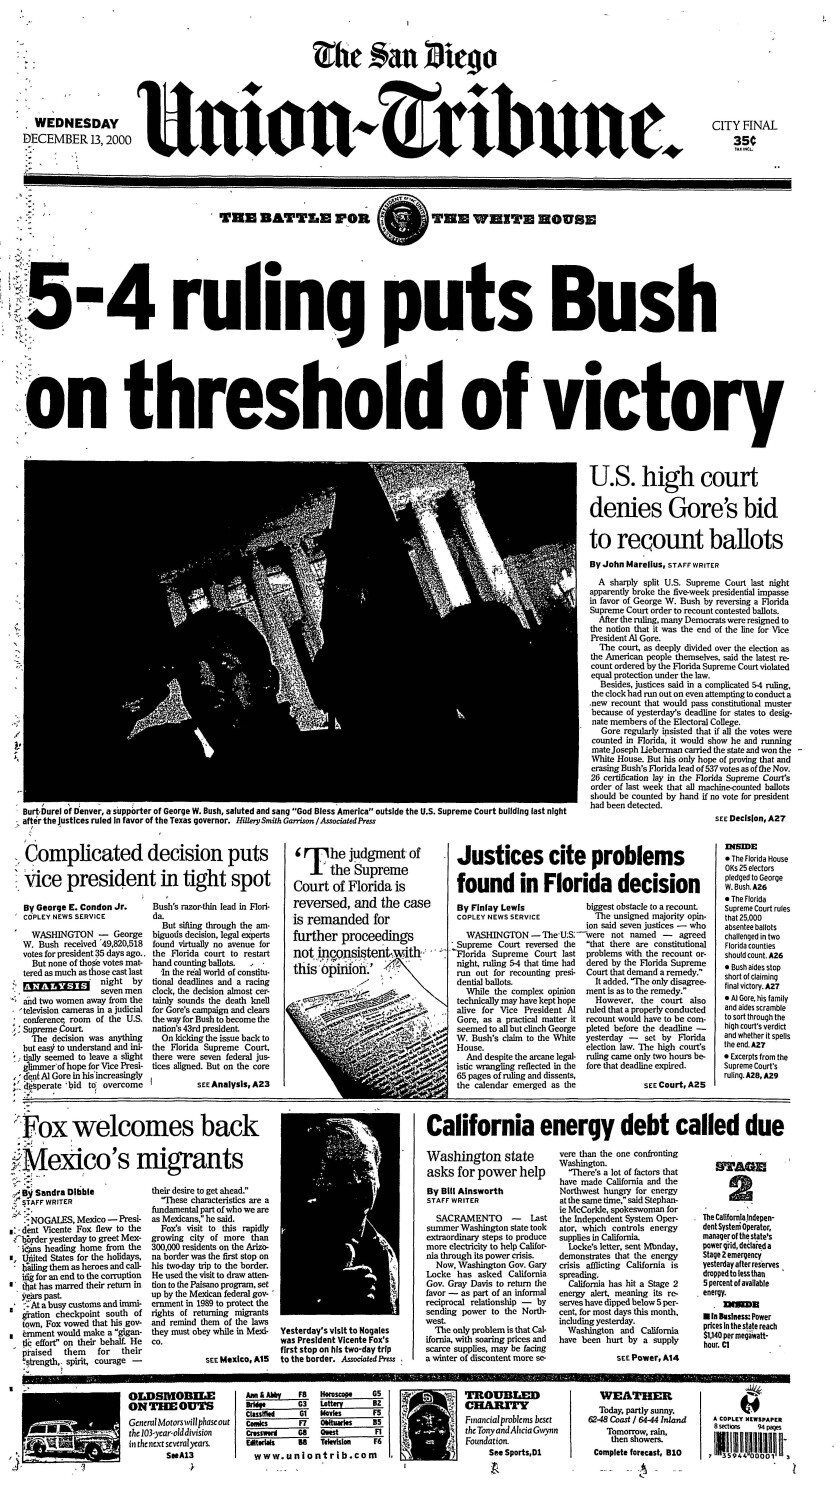 Supreme court rules in 2000 battle for the White House, front page of The San Diego Union-Tribune, Dec. 13, 2000.